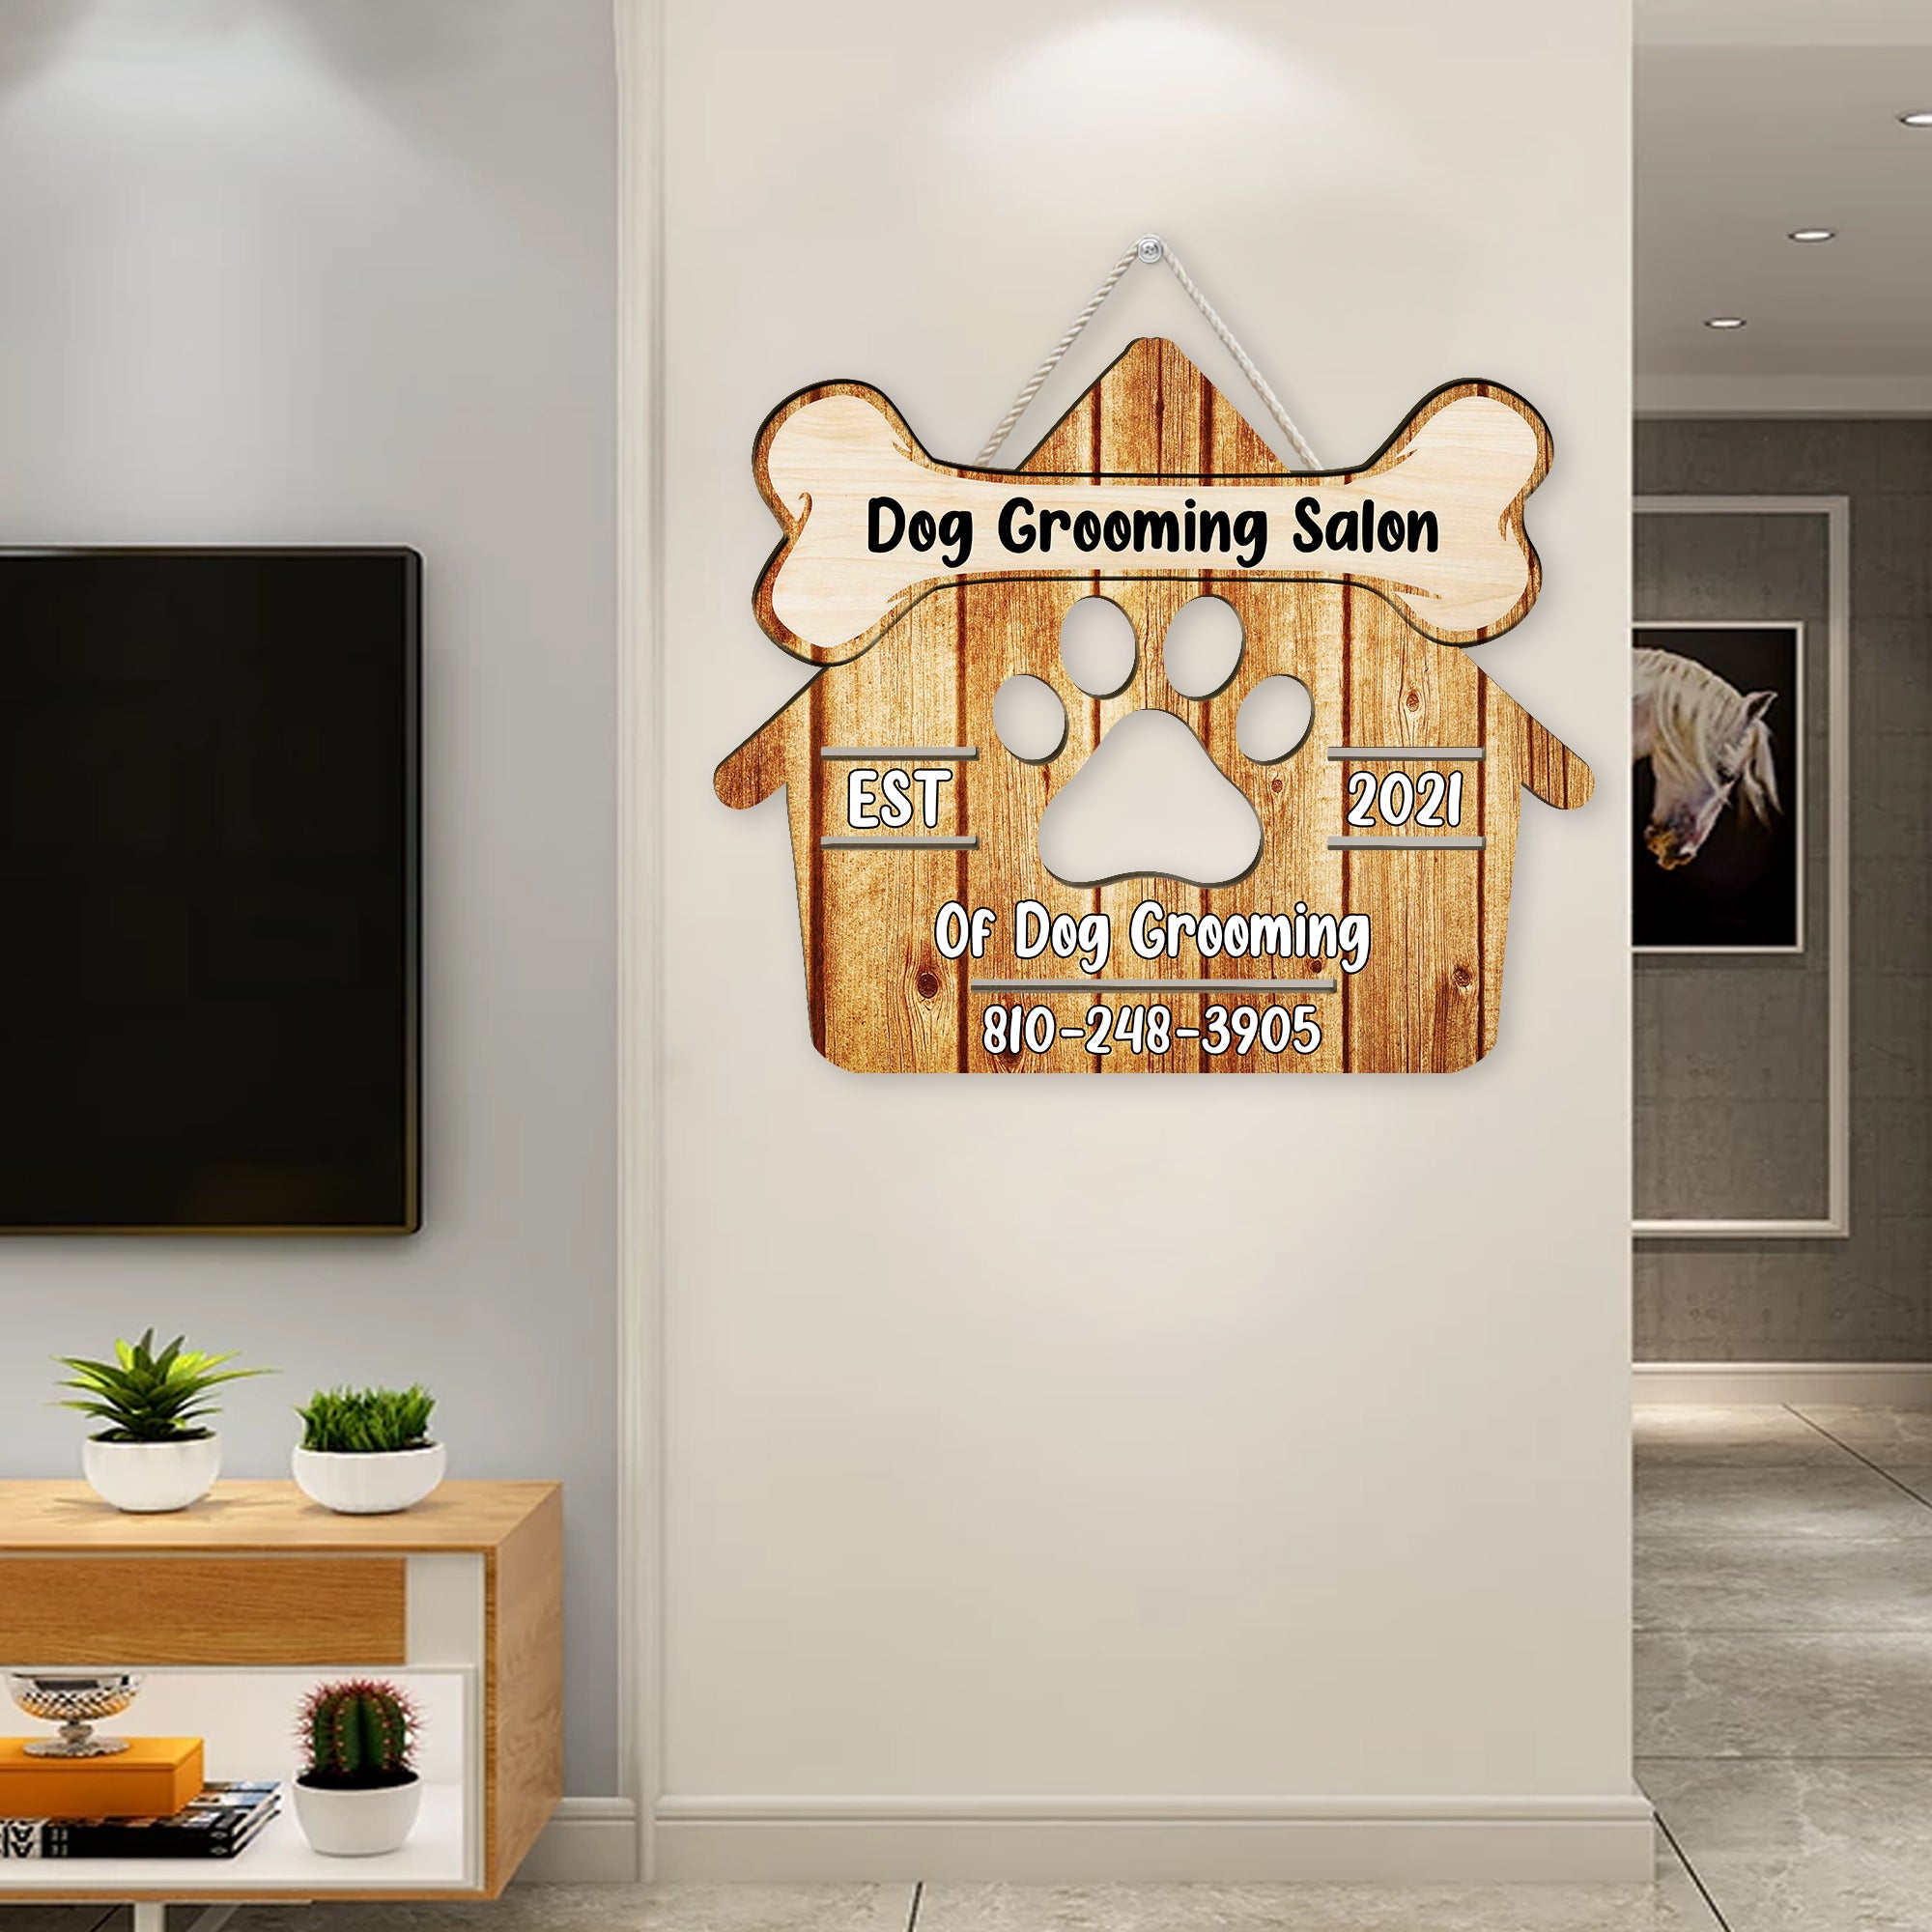 CUSTOM SHAPED WOODEN SIGN – PERSONALIZED DOG GROOMING SALON